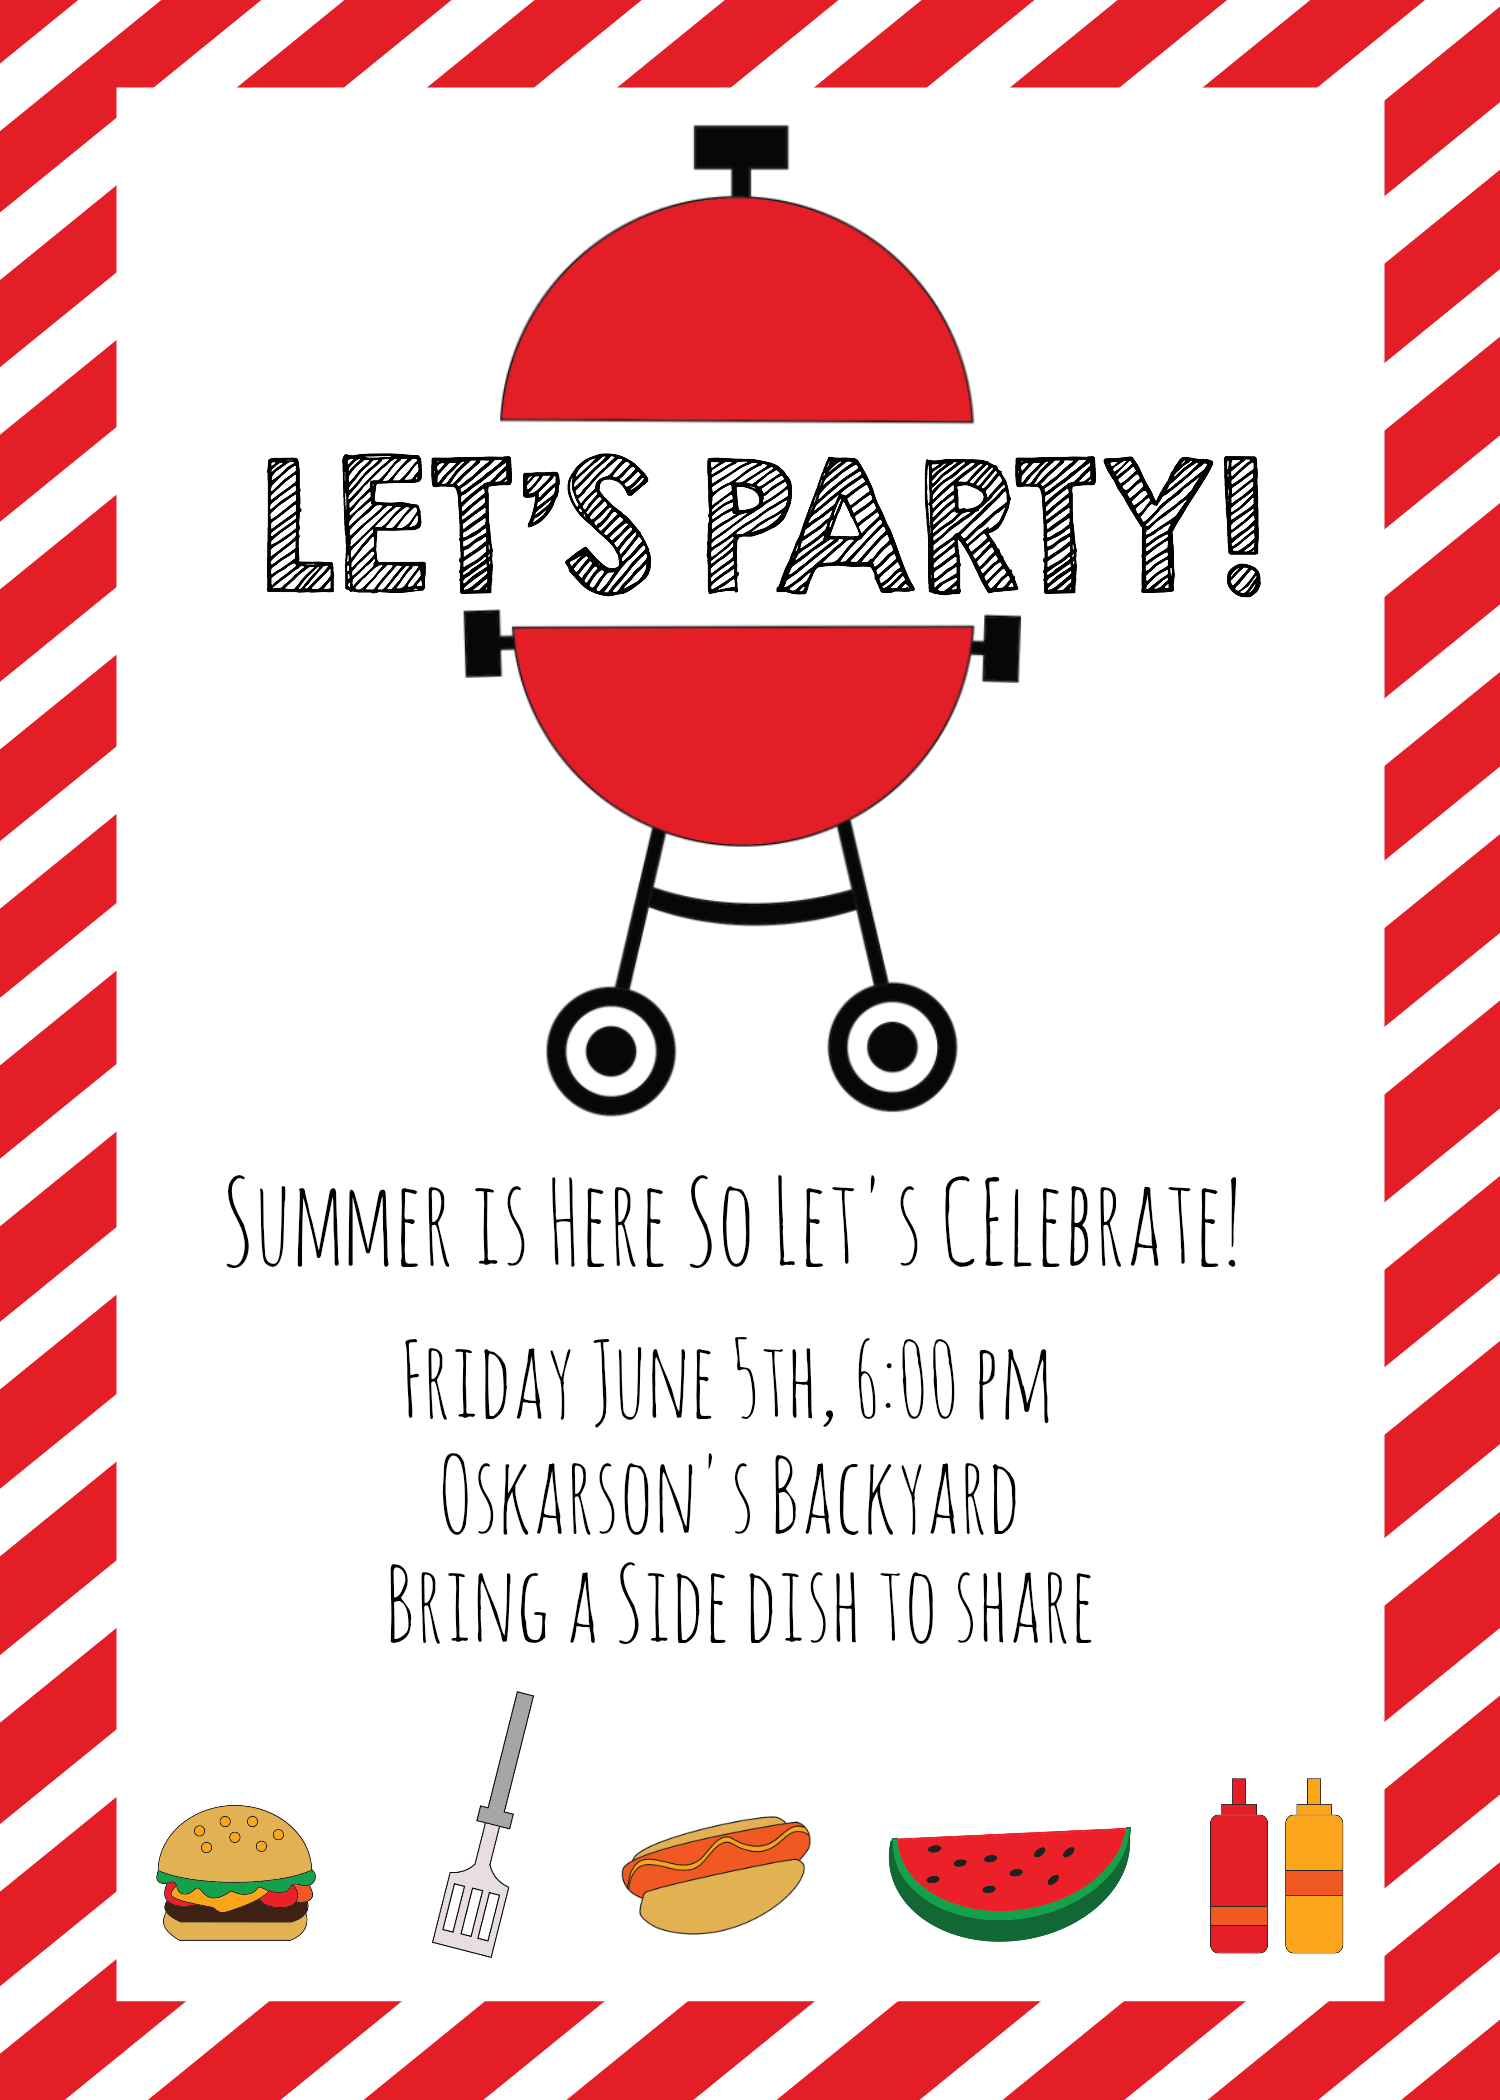 the-22-best-ideas-for-summer-party-invitation-ideas-home-family